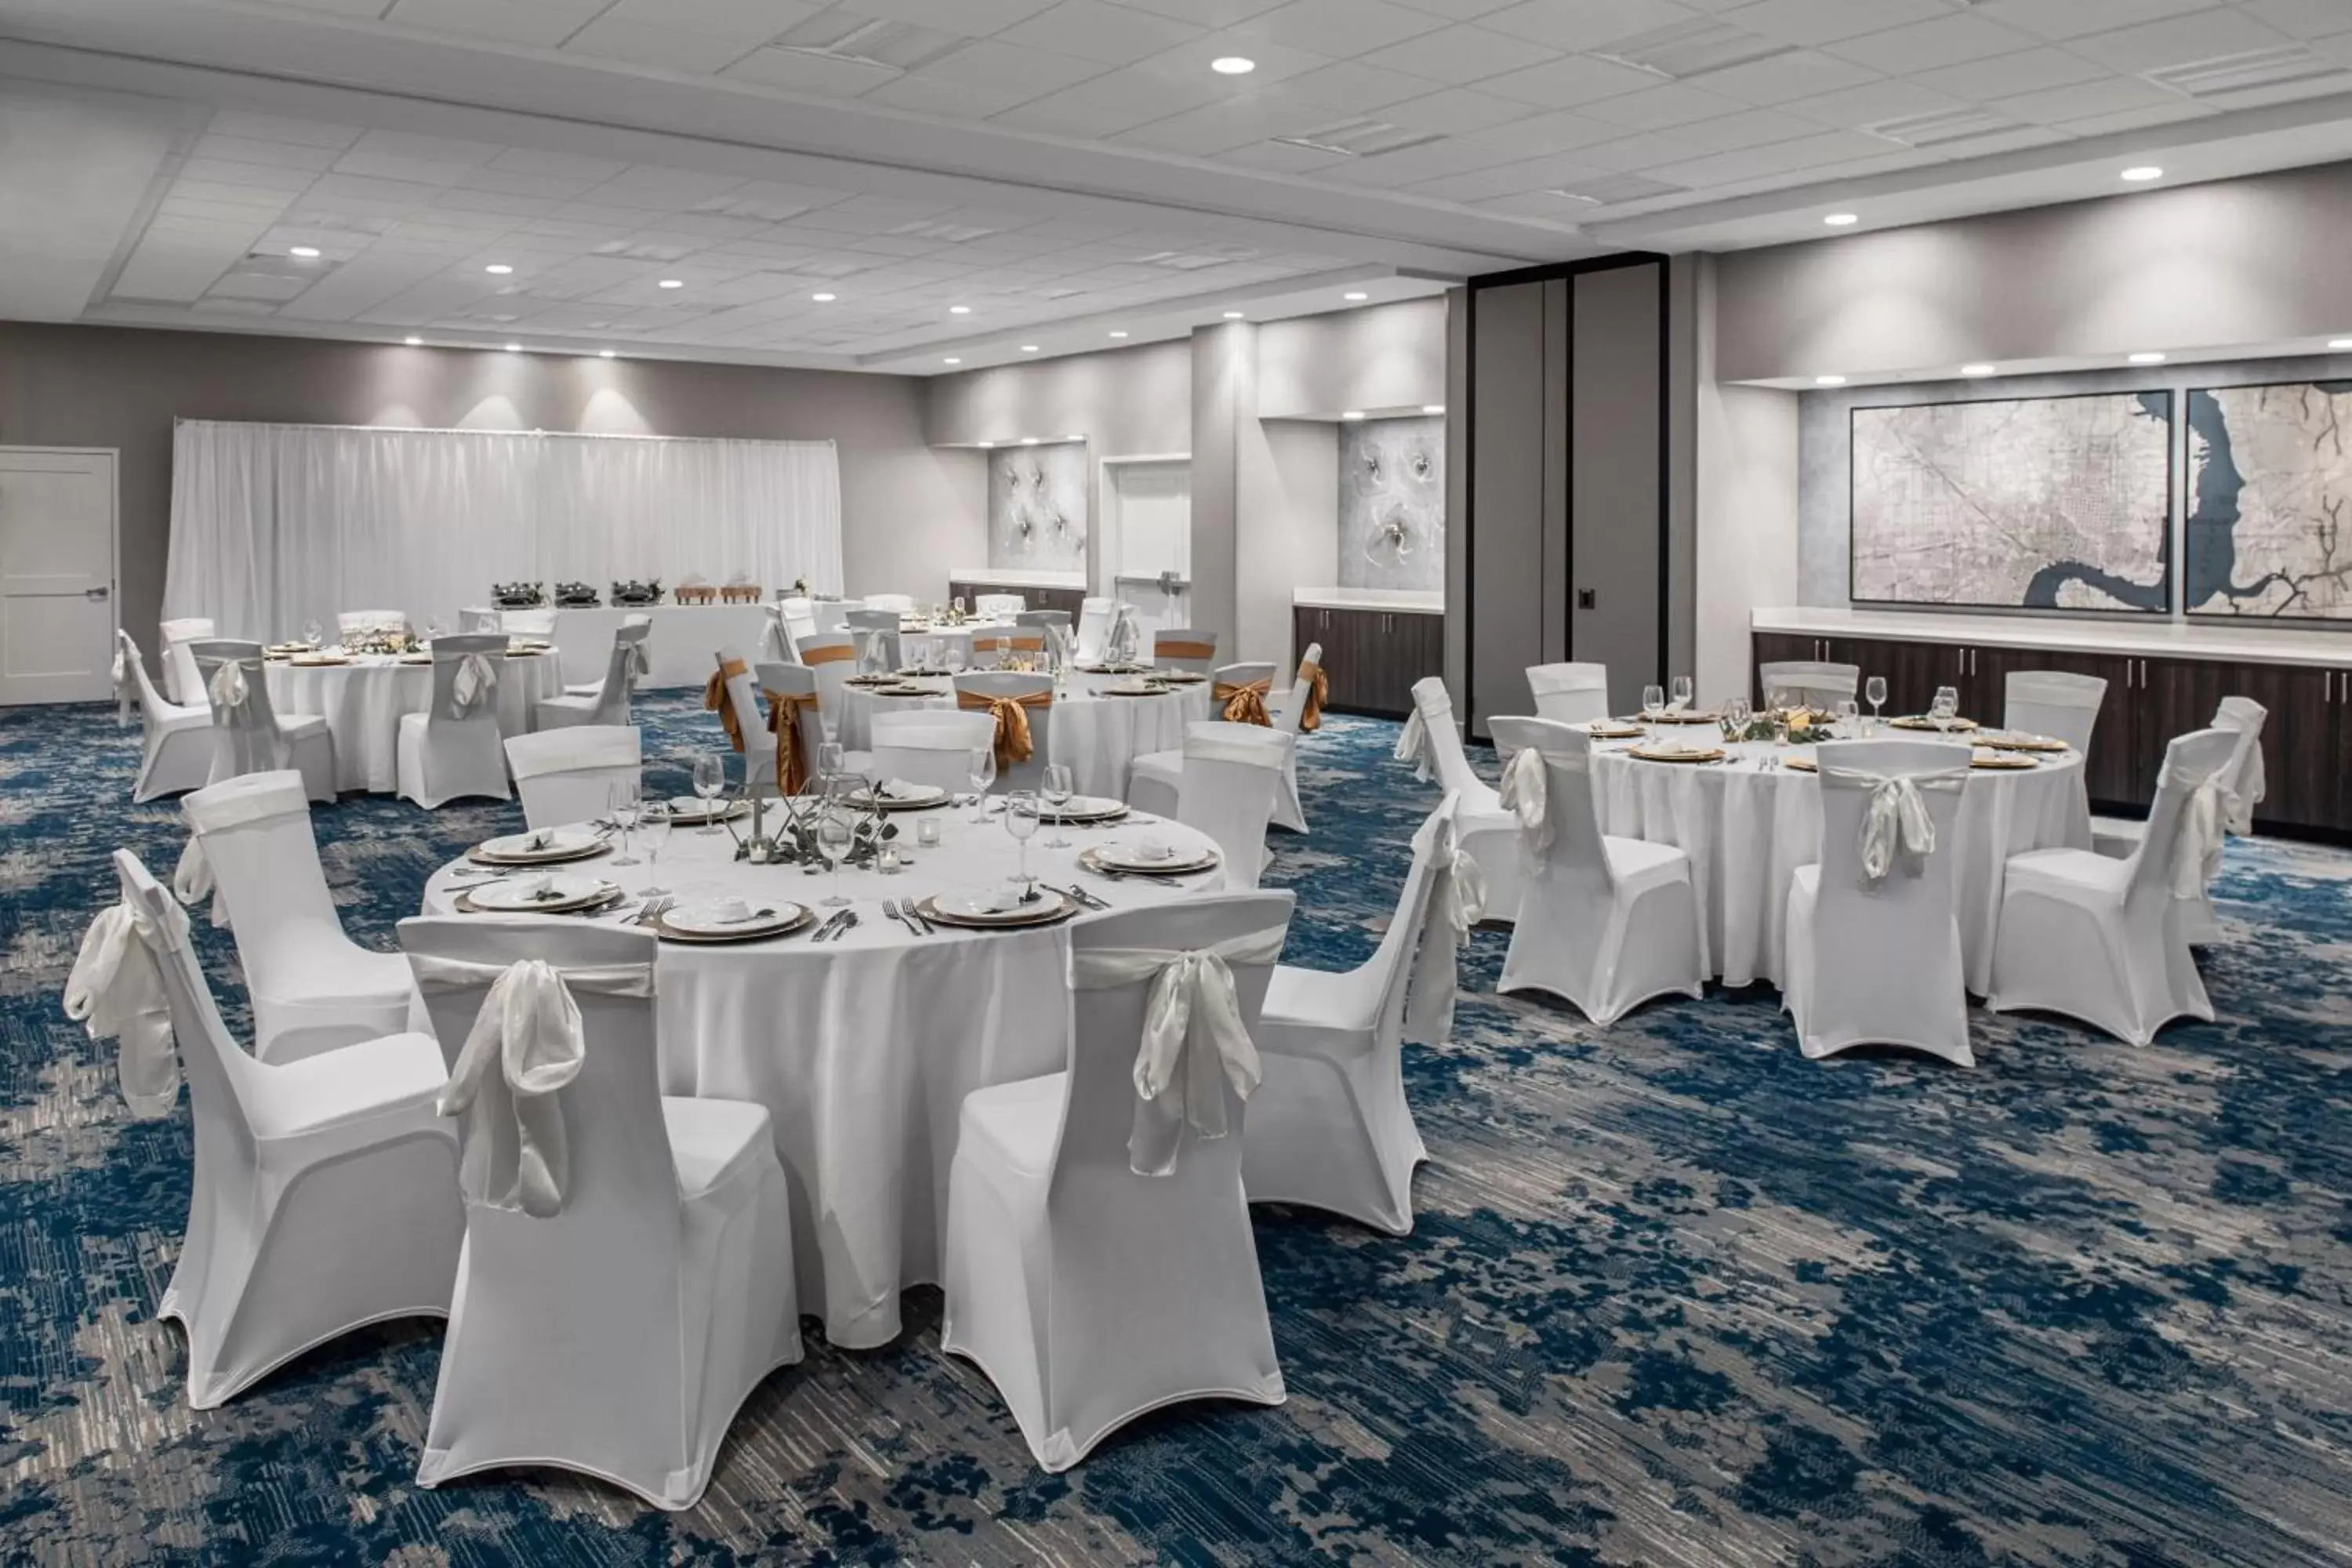 Banquet/Function facilities, Banquet Facilities in Residence Inn By Marriott Jacksonville-Mayo Clinic Area